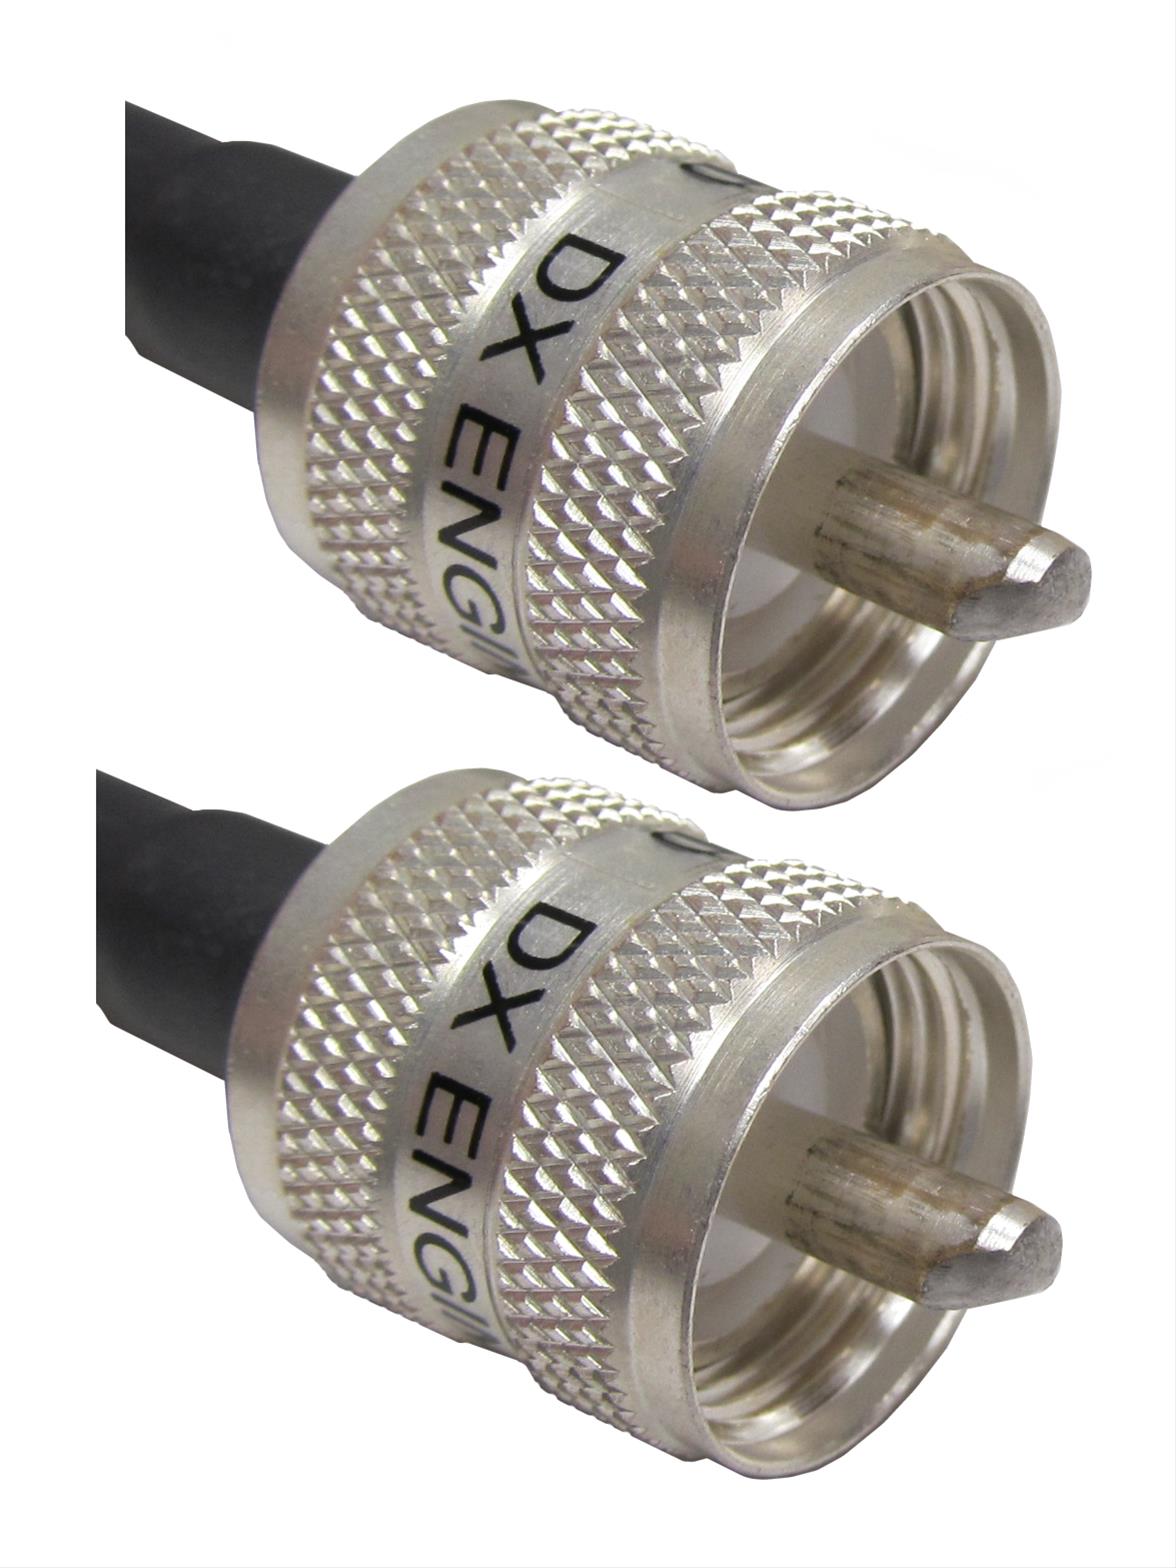 50' ft Coax Cable LMR400 RG213U Type with UHF Male PL259 Connectors Solid Copper 